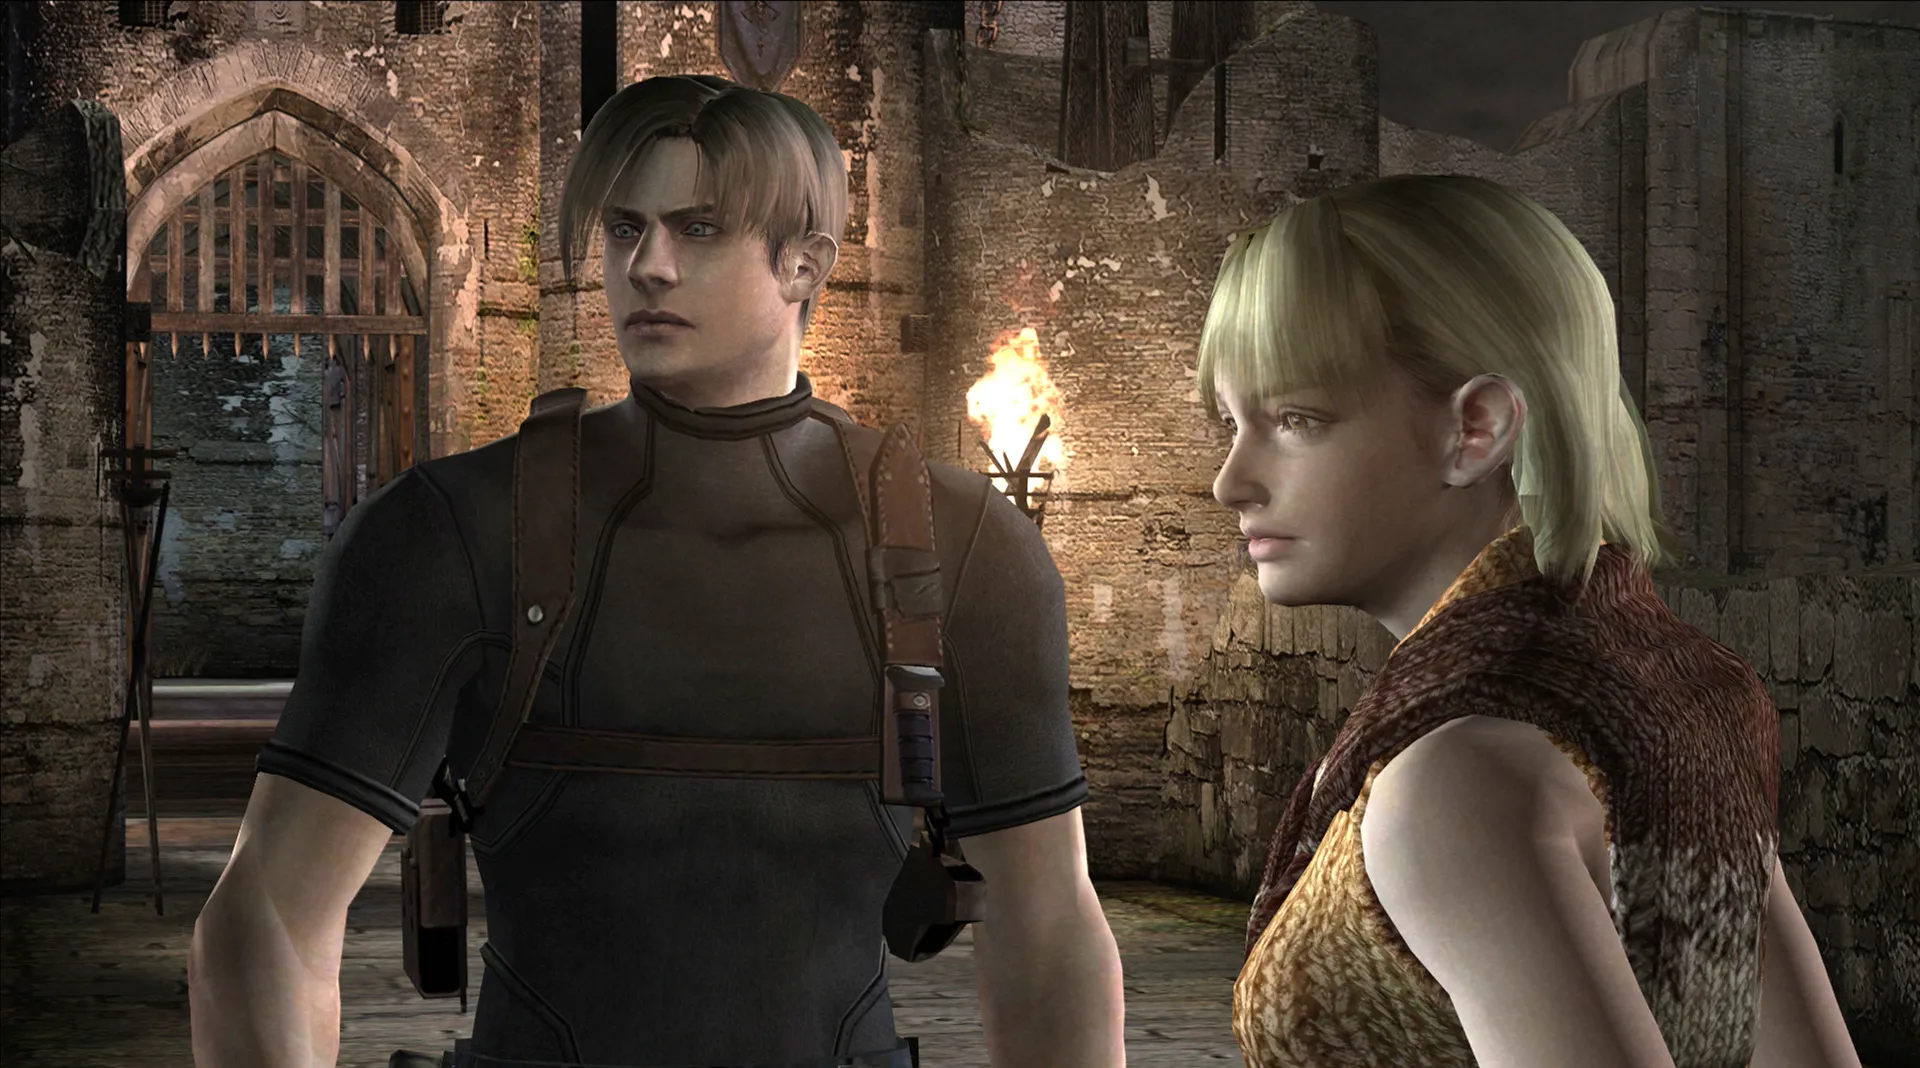 Resident Evil 4: Here Is When the Game Makes Ashley Break the 4th